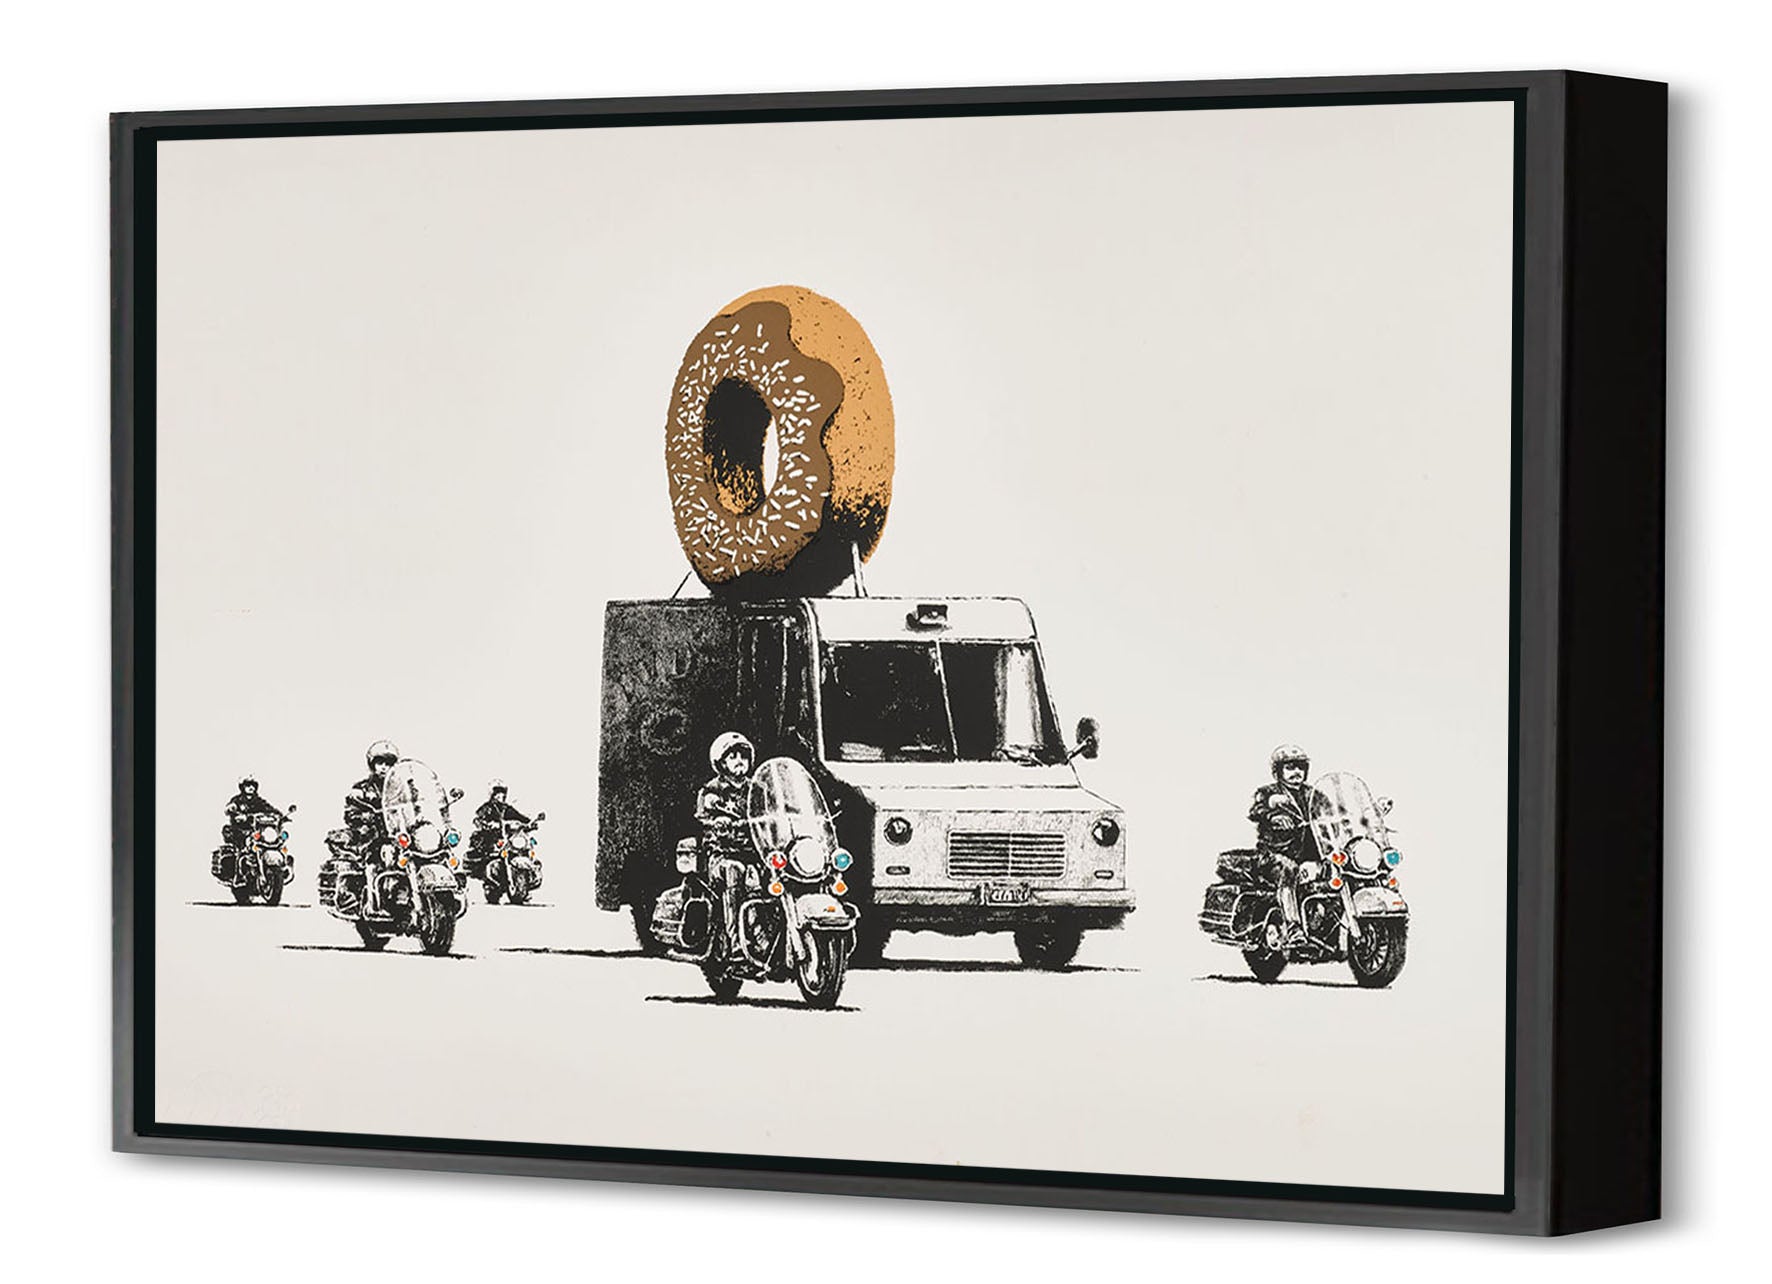 Donuts Chocolate-banksy, print-Canvas Print with Box Frame-40 x 60 cm-BLUE SHAKER